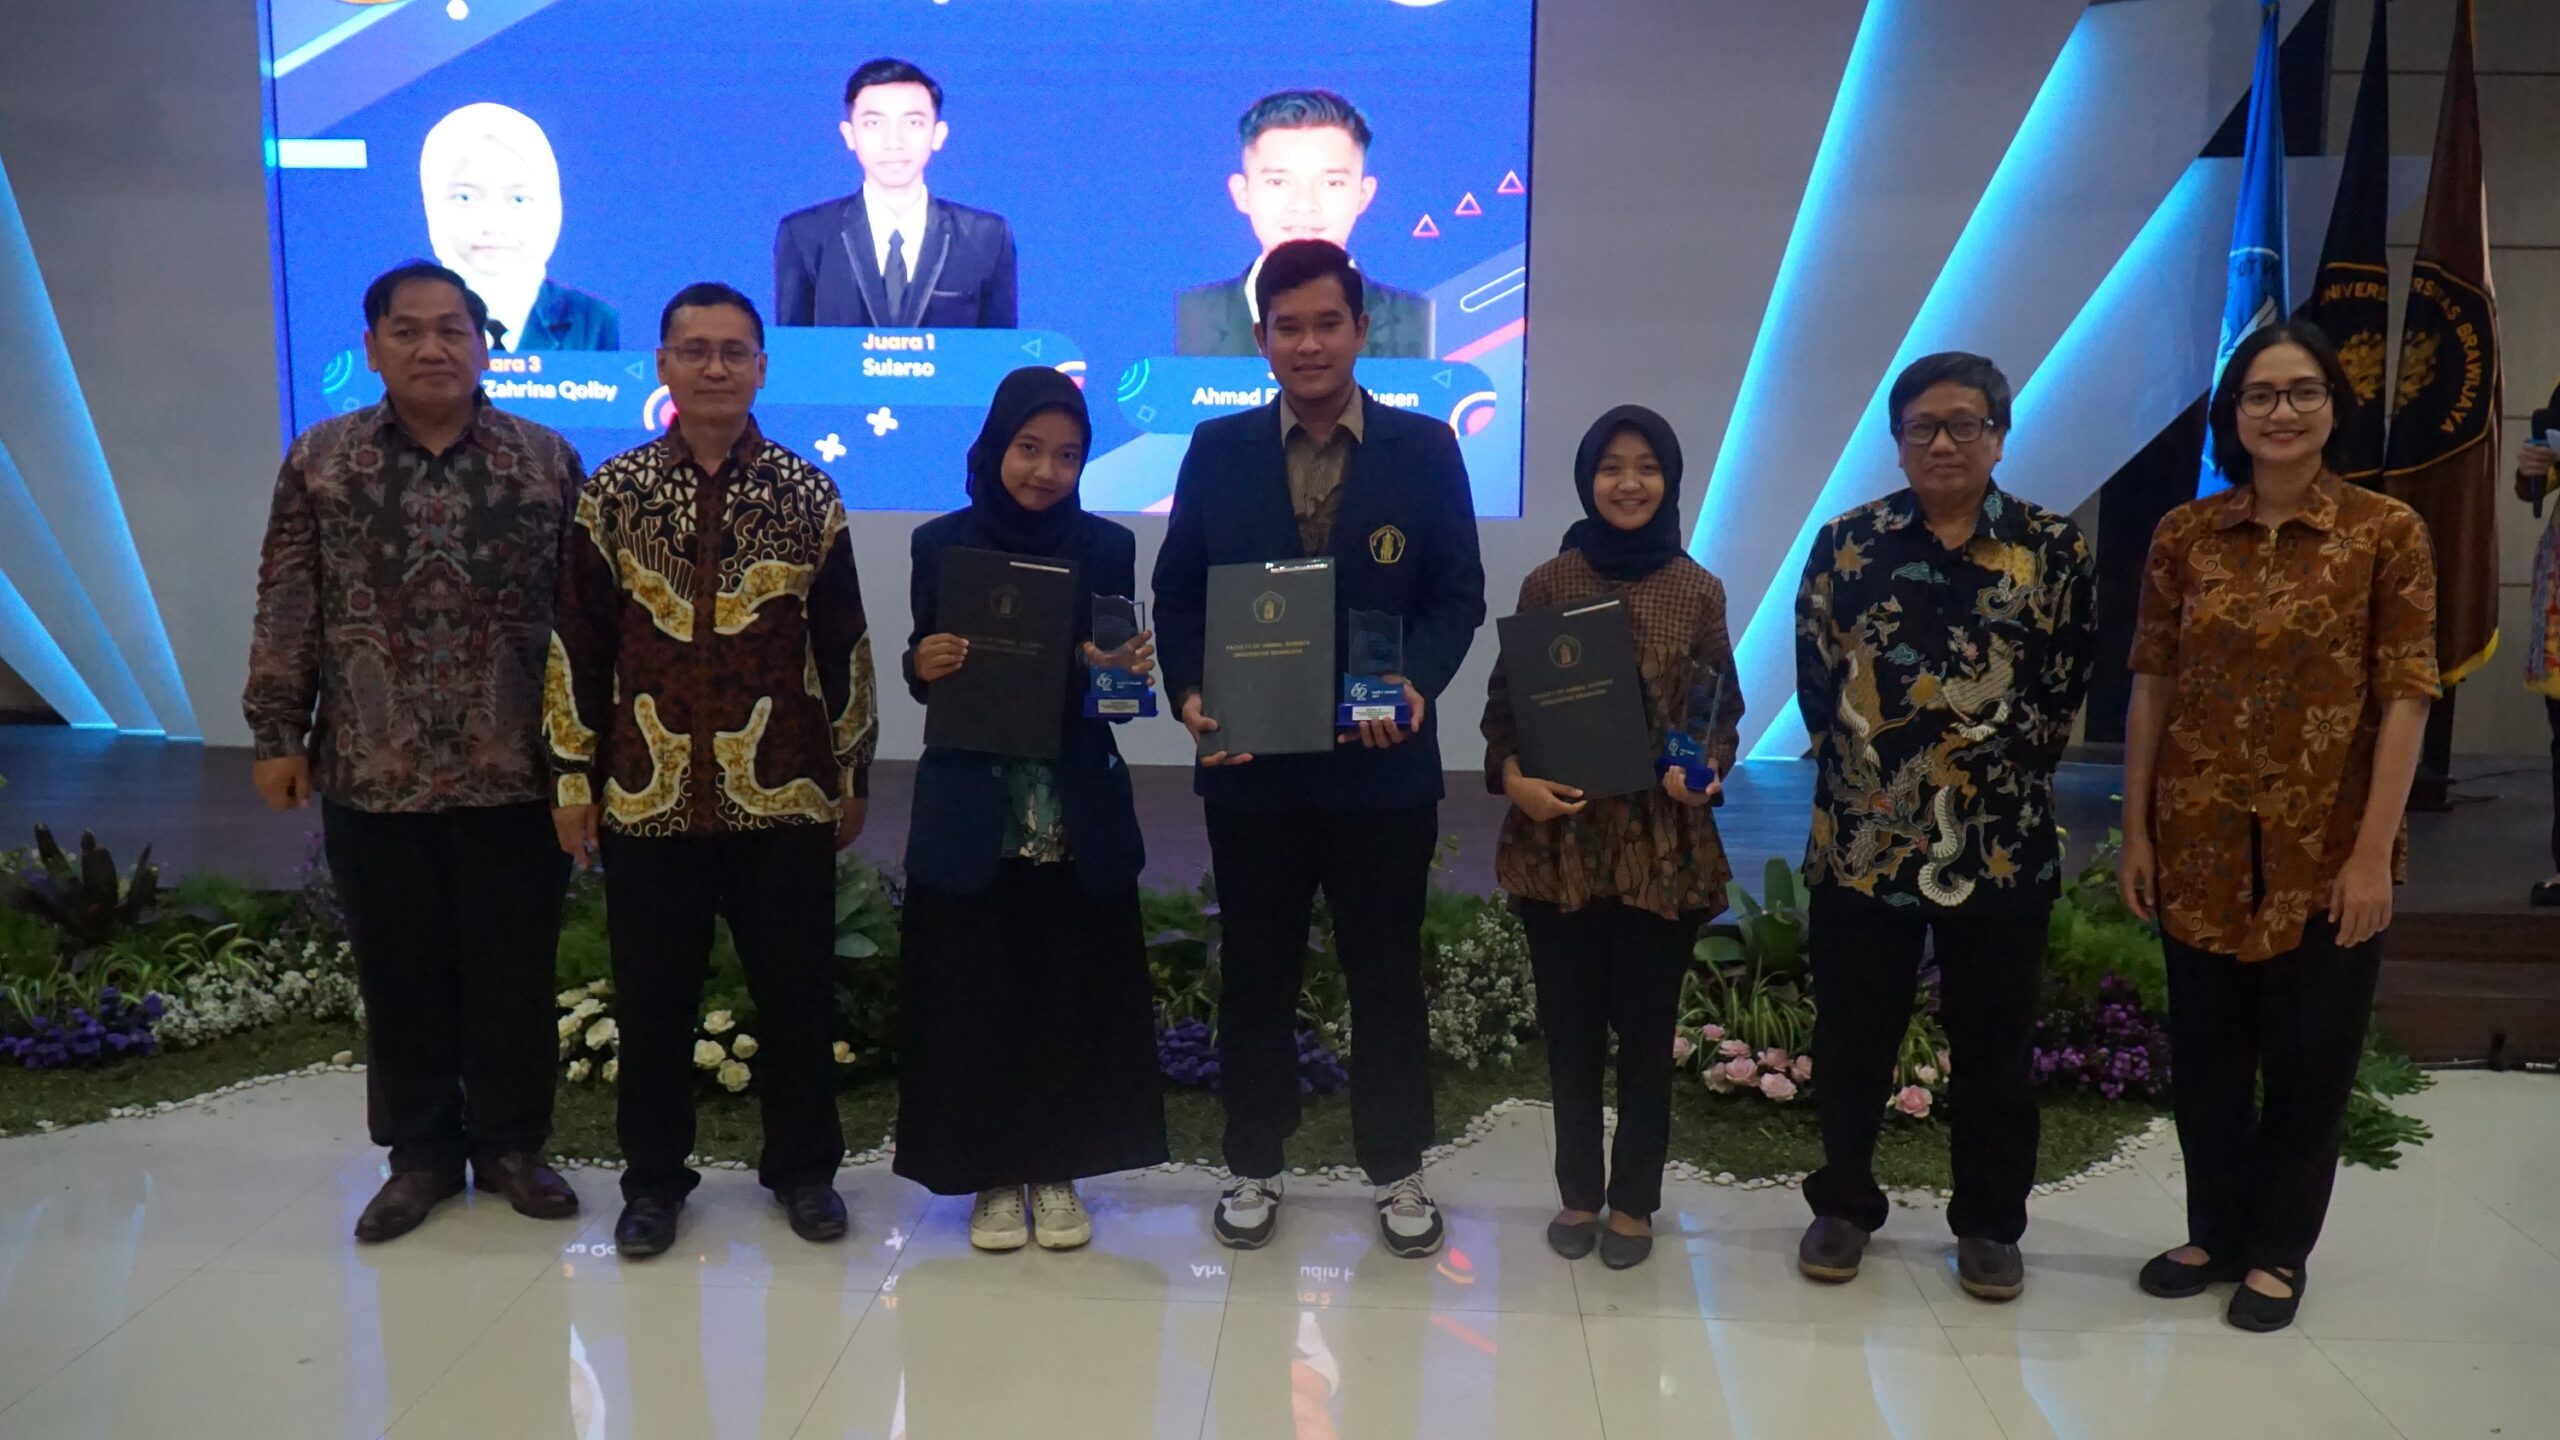 Giving Awards to Outstanding Lecturers and Students Celebrating the 62nd Anniversary of Faculty of Animal Husbandry UB